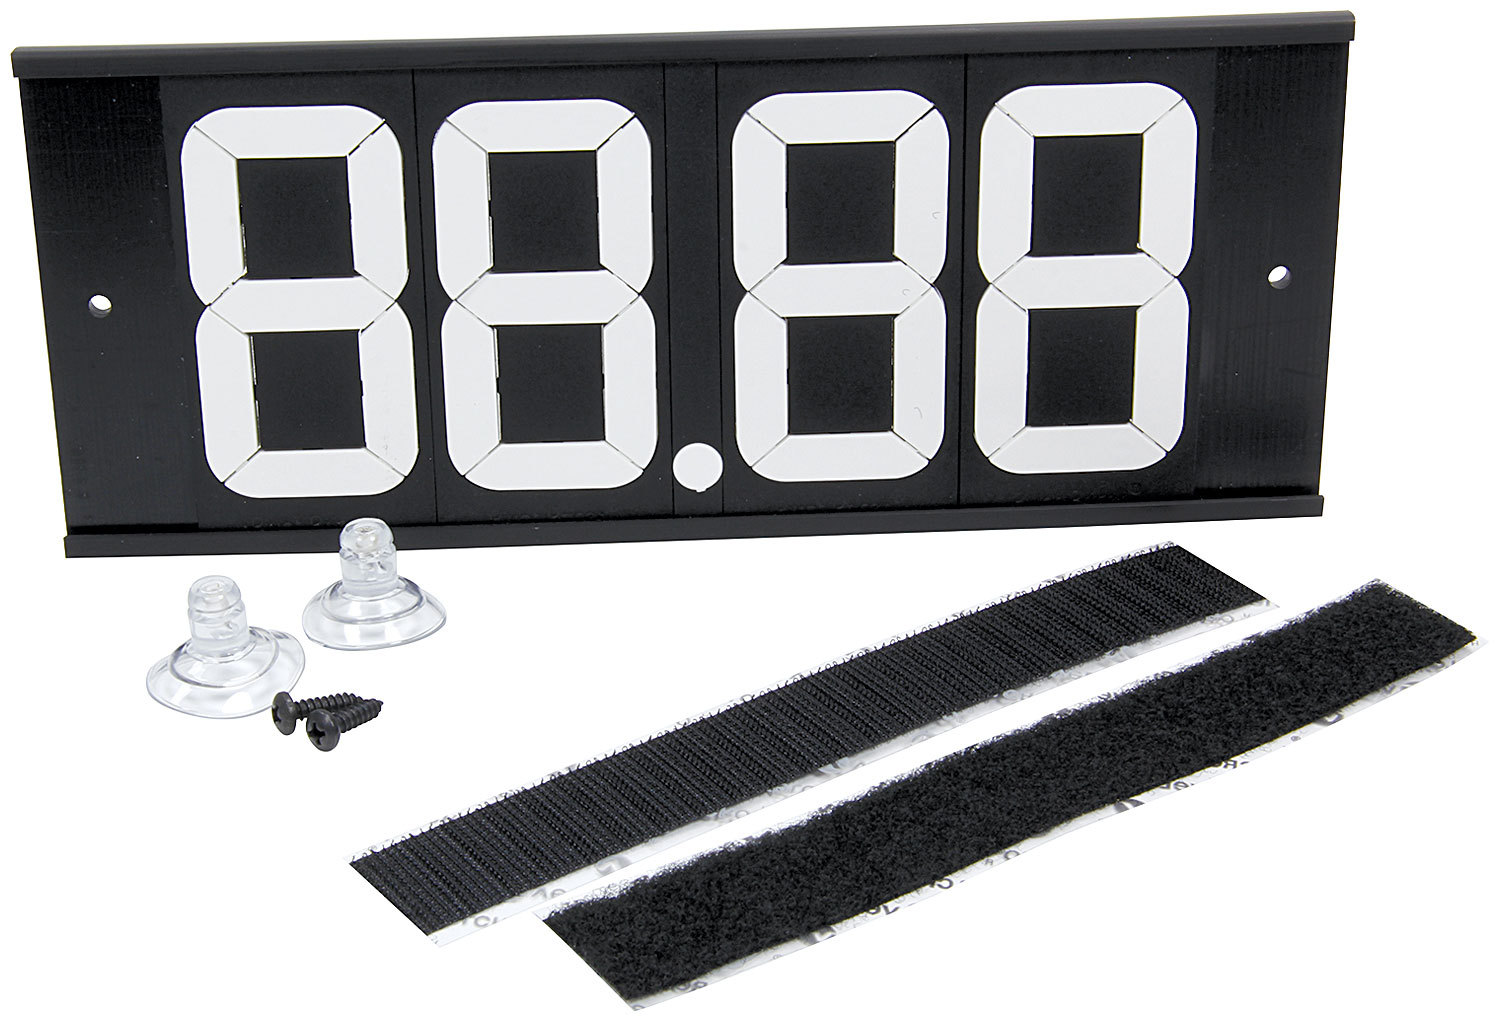 Dial-In Board 4 Digit w/ Suction Cups and Velcro